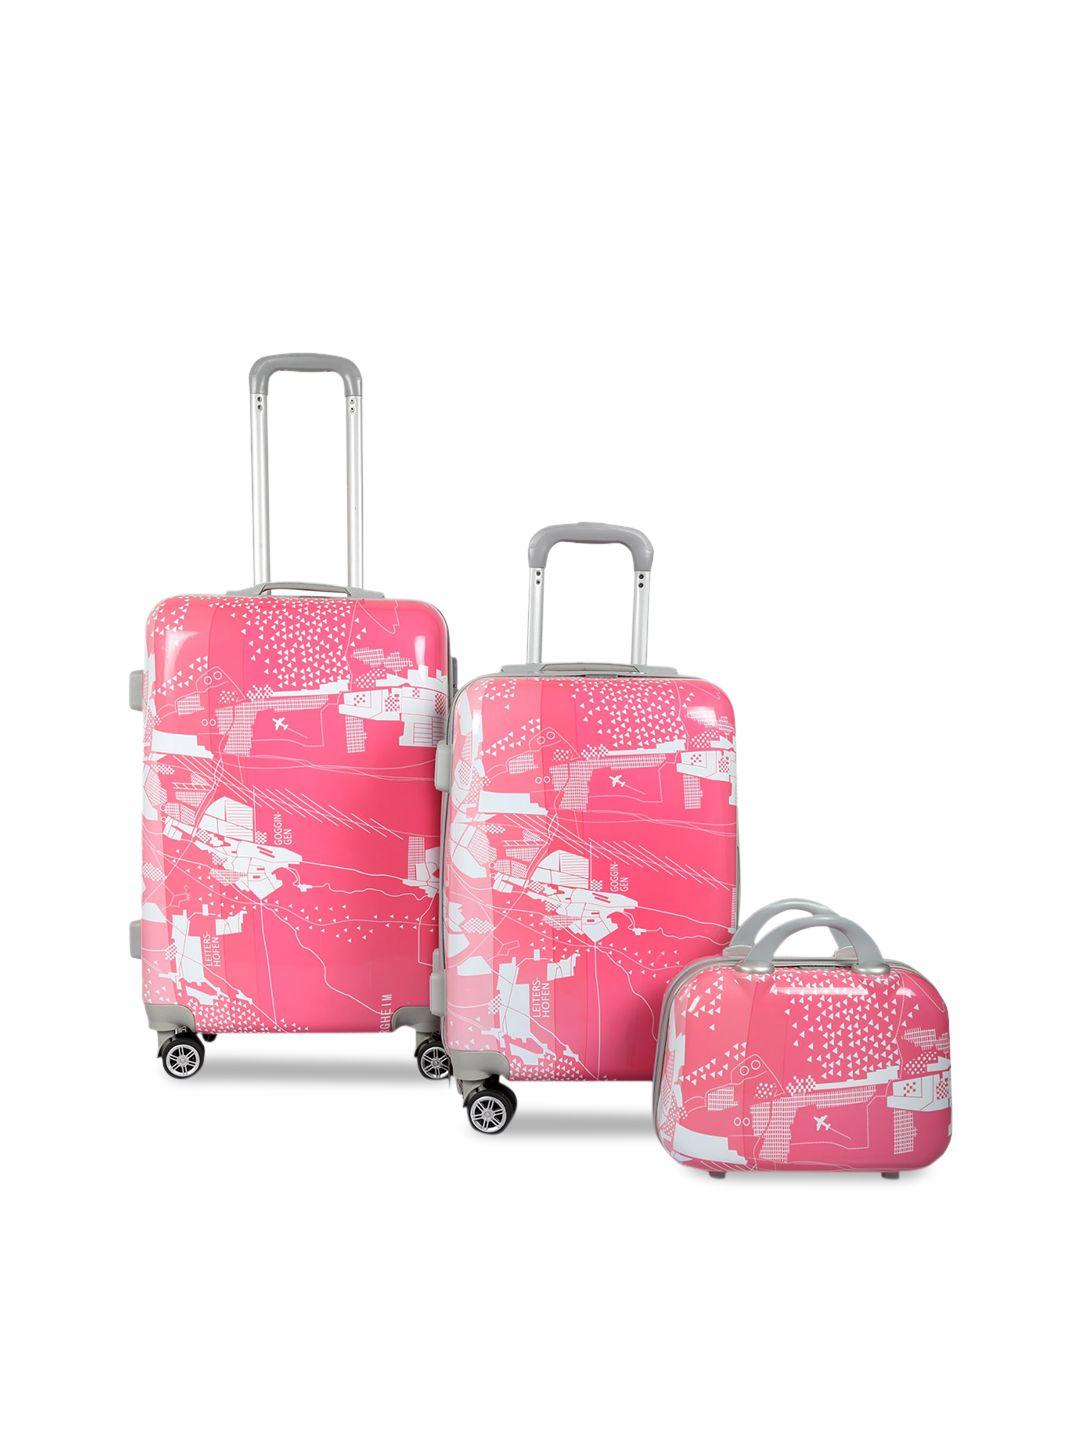 polo class pink 2 pc set hard trolley bag with 1pc vanity bag - pink